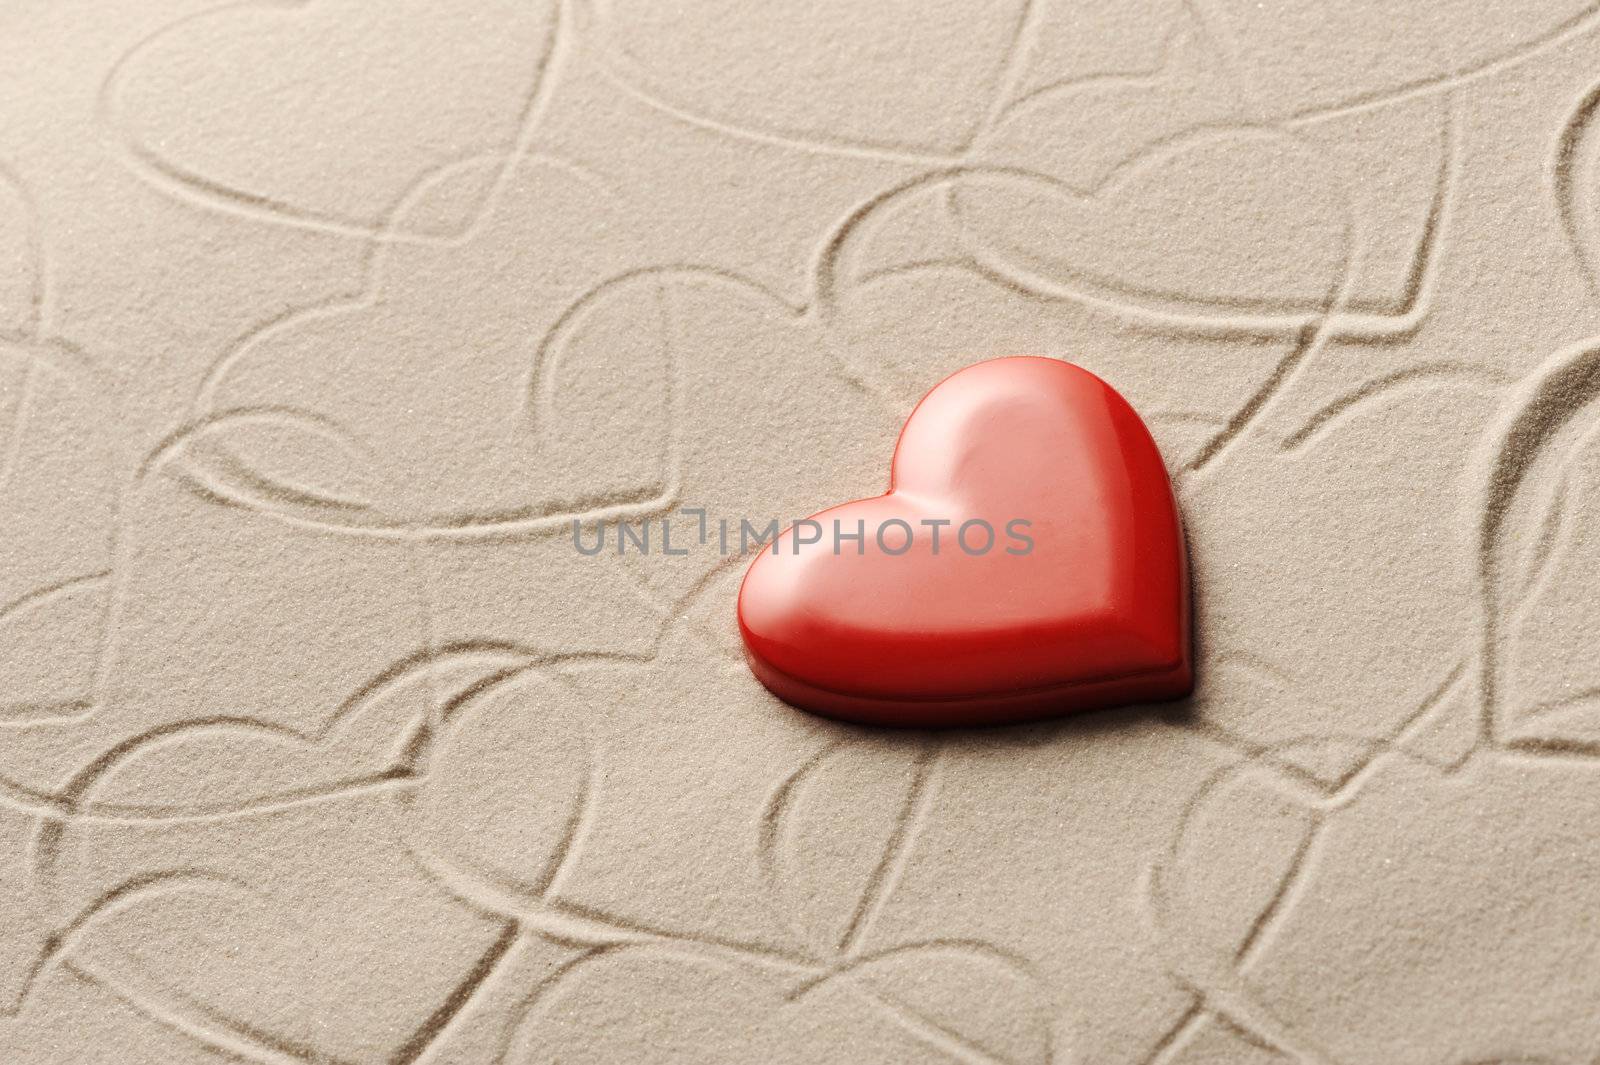 Beach background with hearts drawing by stokkete